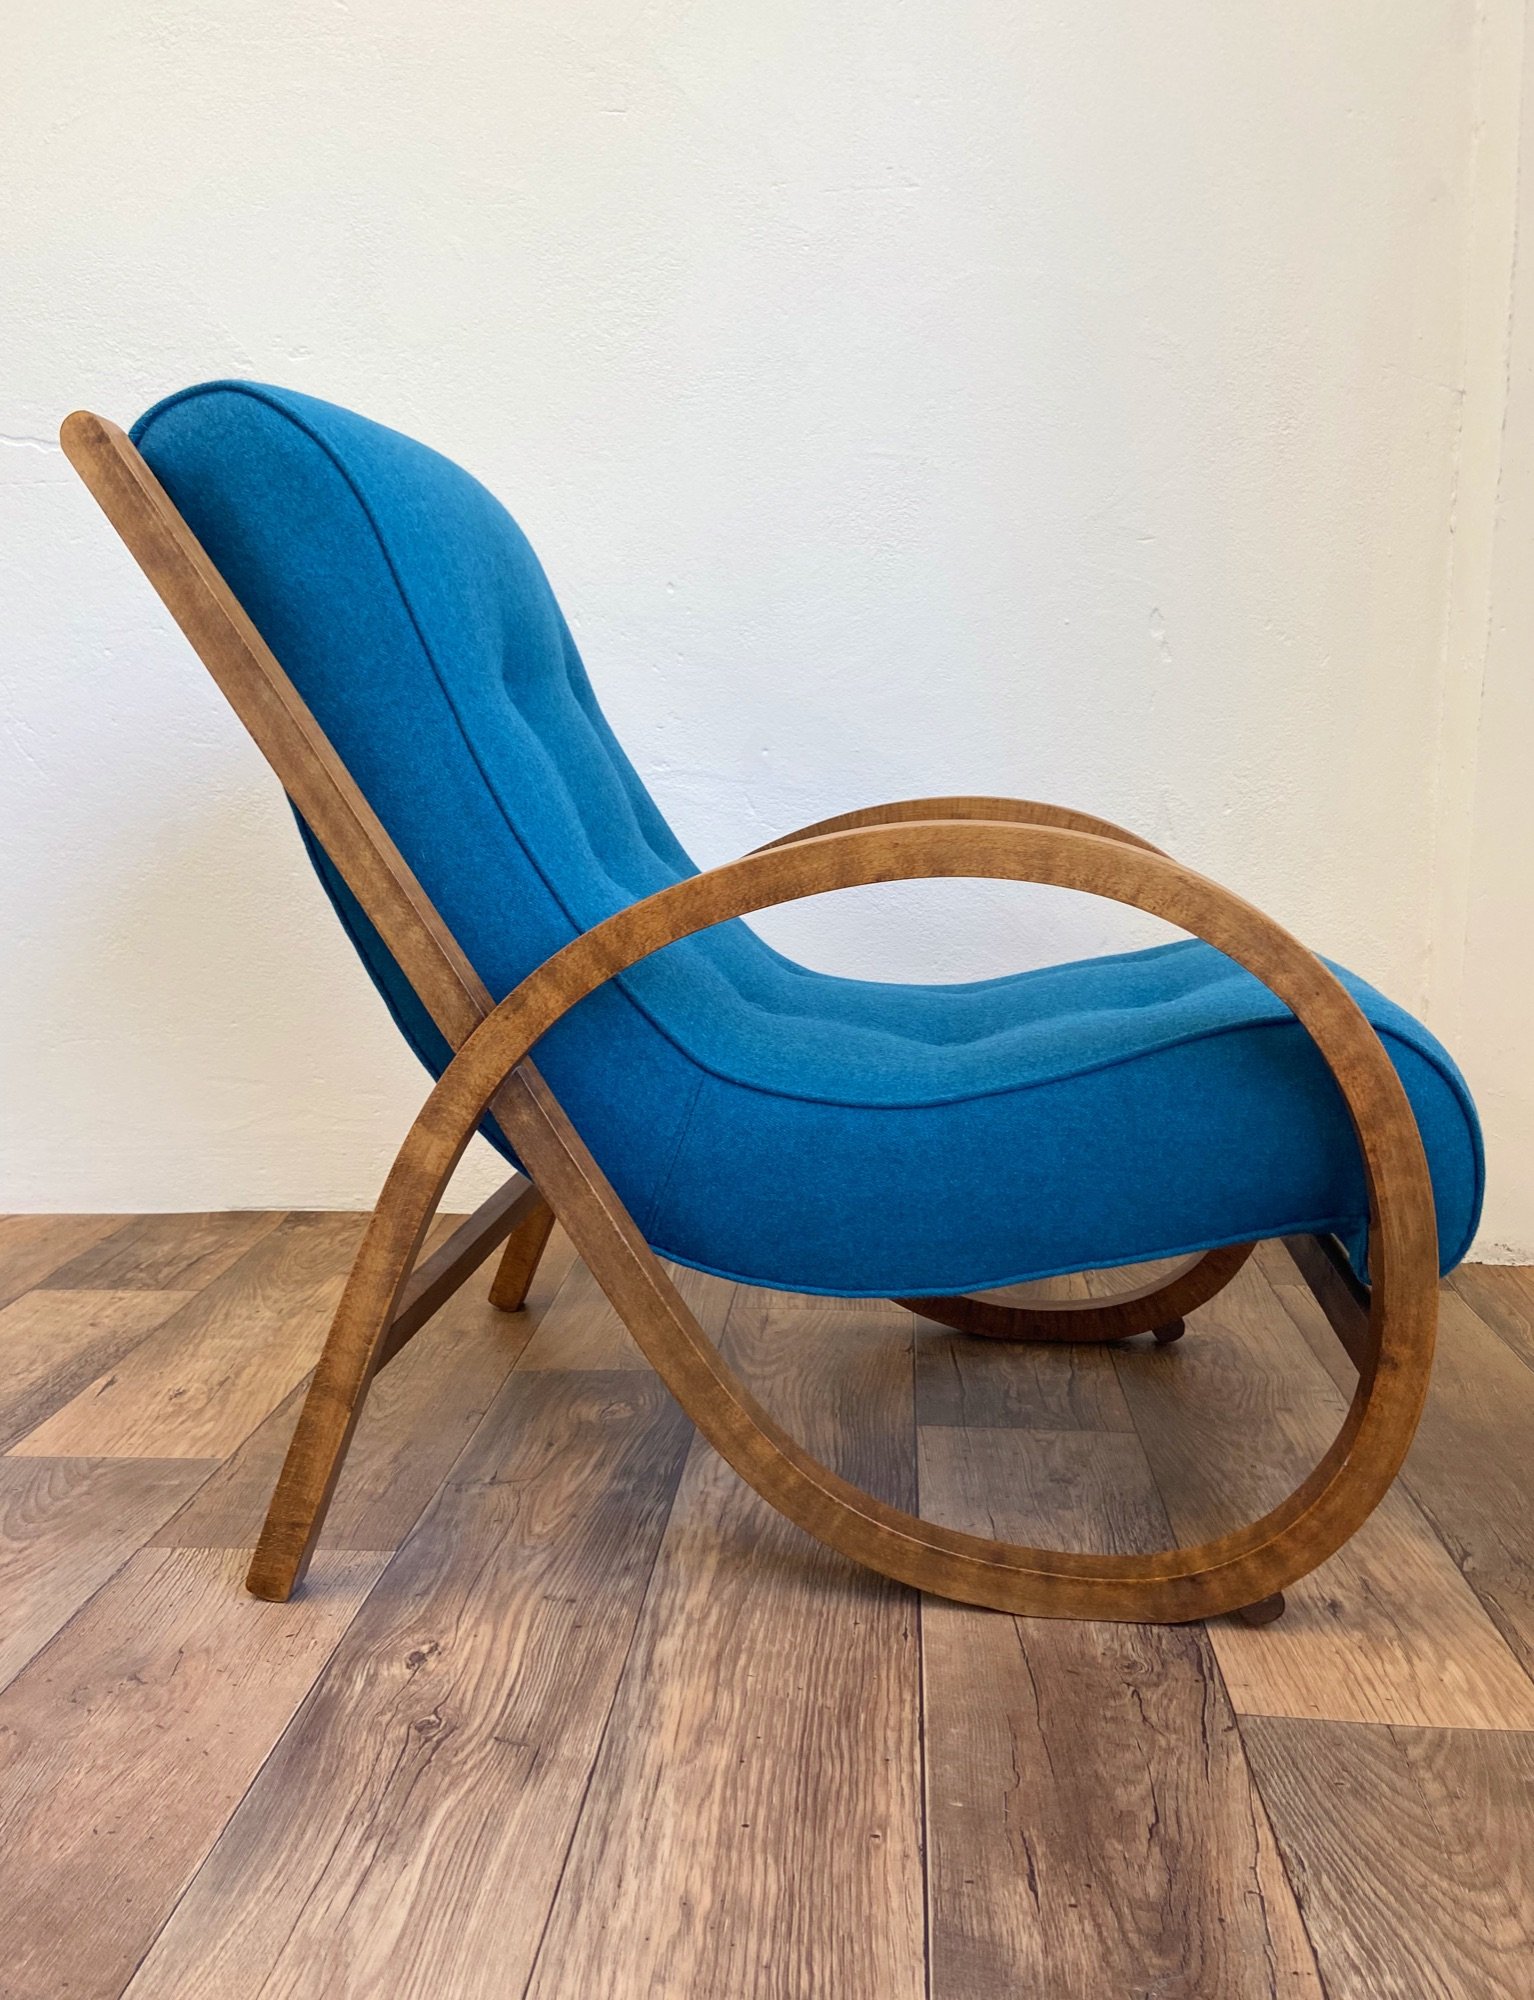 Suparest chair in Camira Synergy wool felt by Spring Upholstery Brighton